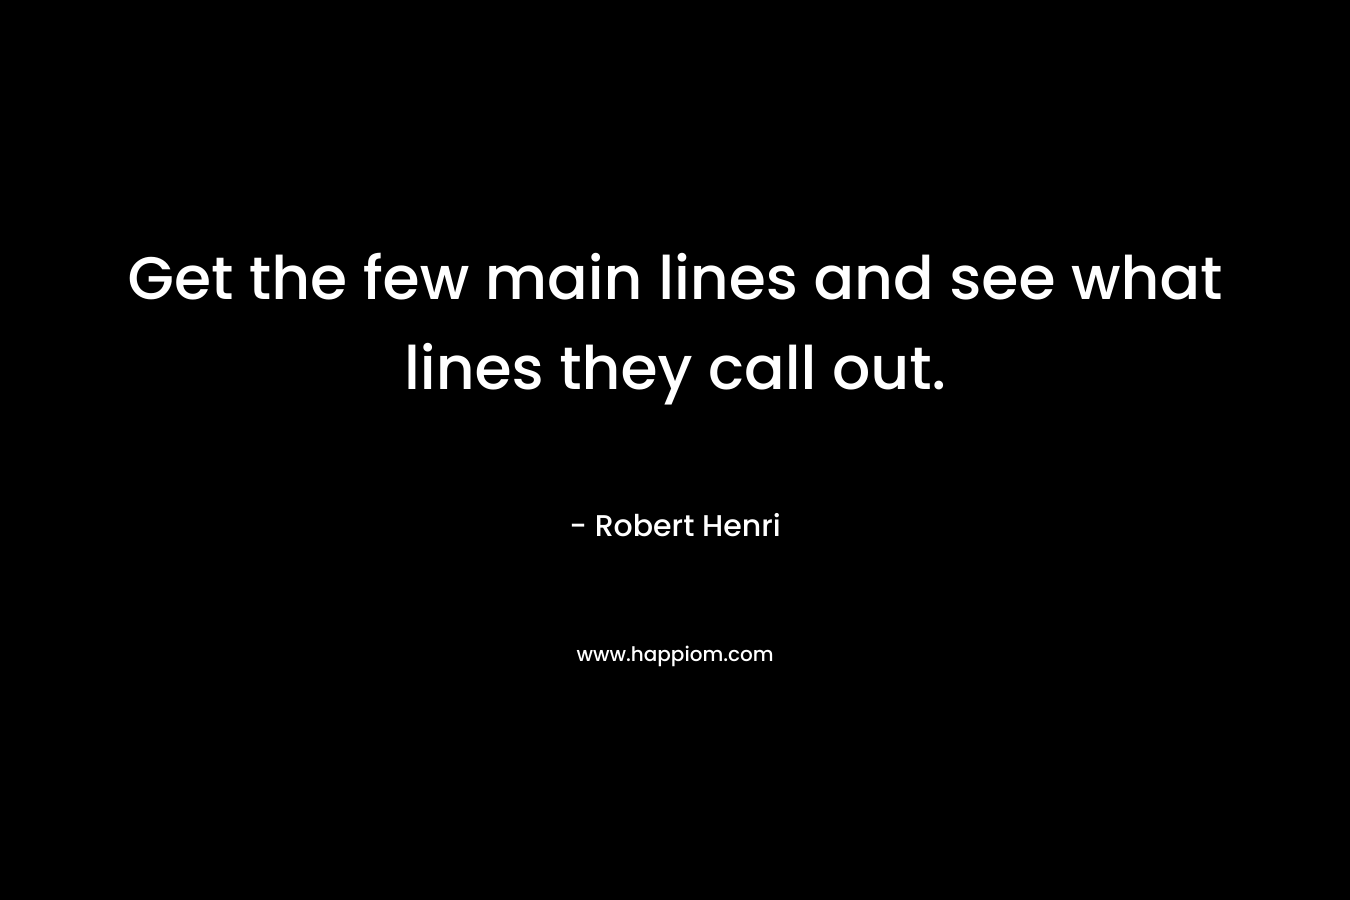 Get the few main lines and see what lines they call out. – Robert Henri